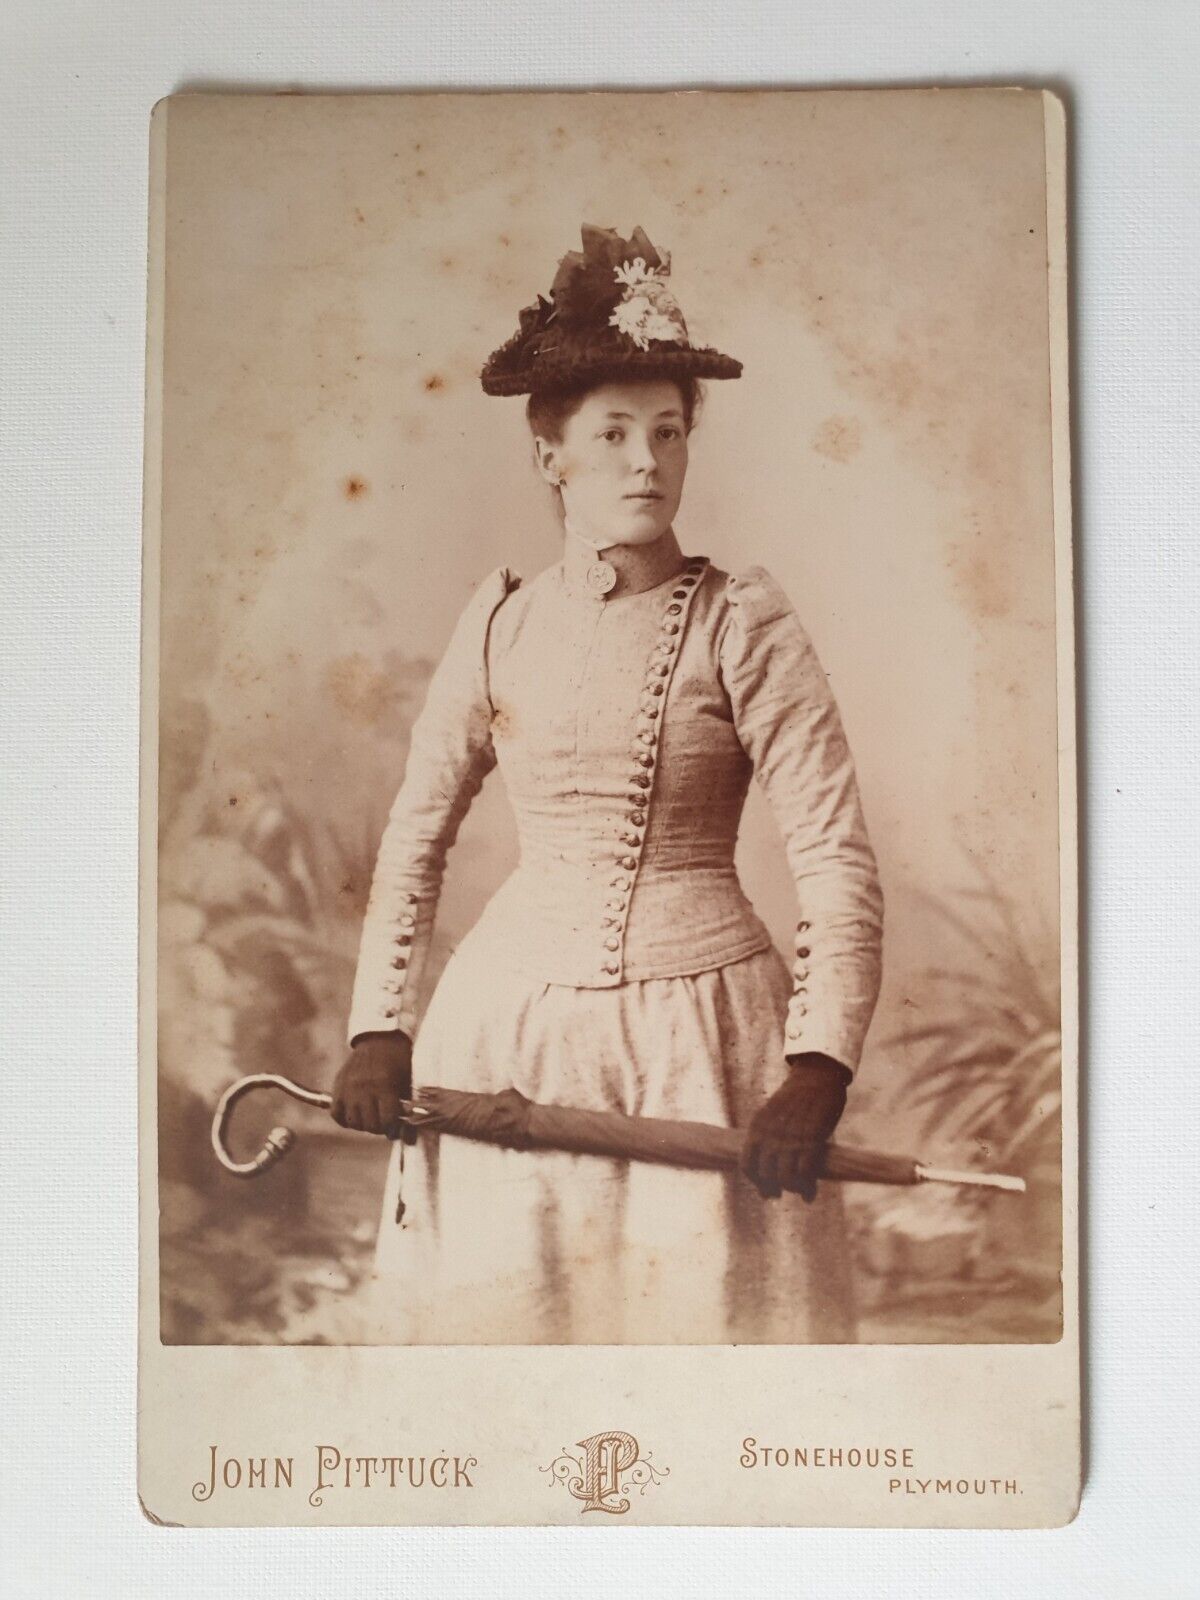 Cabinet Photo Of A Lady With An Umbrella. John Pittuck, Stonehouse, Plymouth.